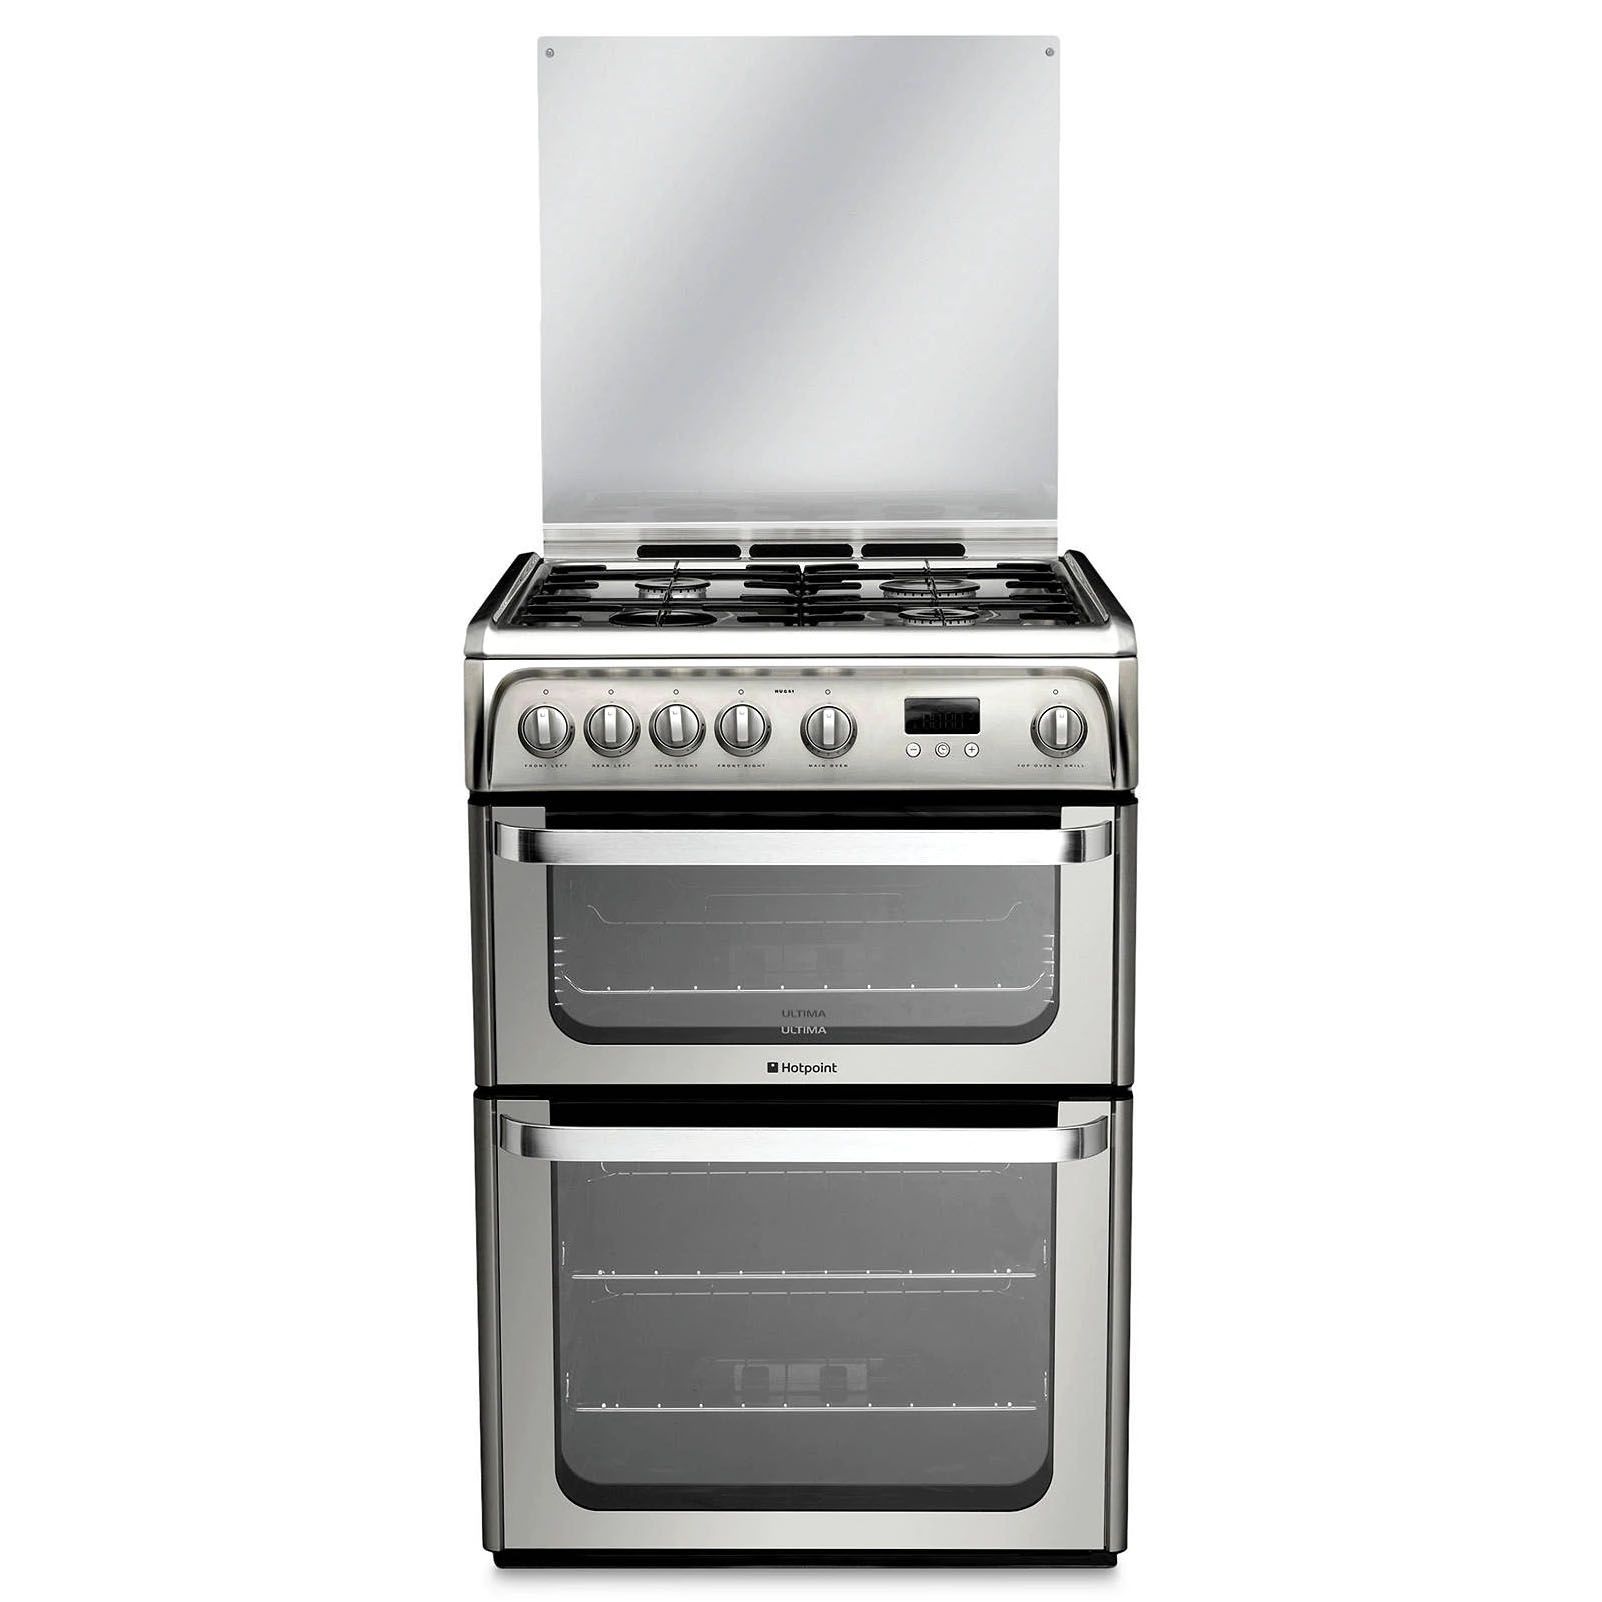 freestanding electric cooker with lid